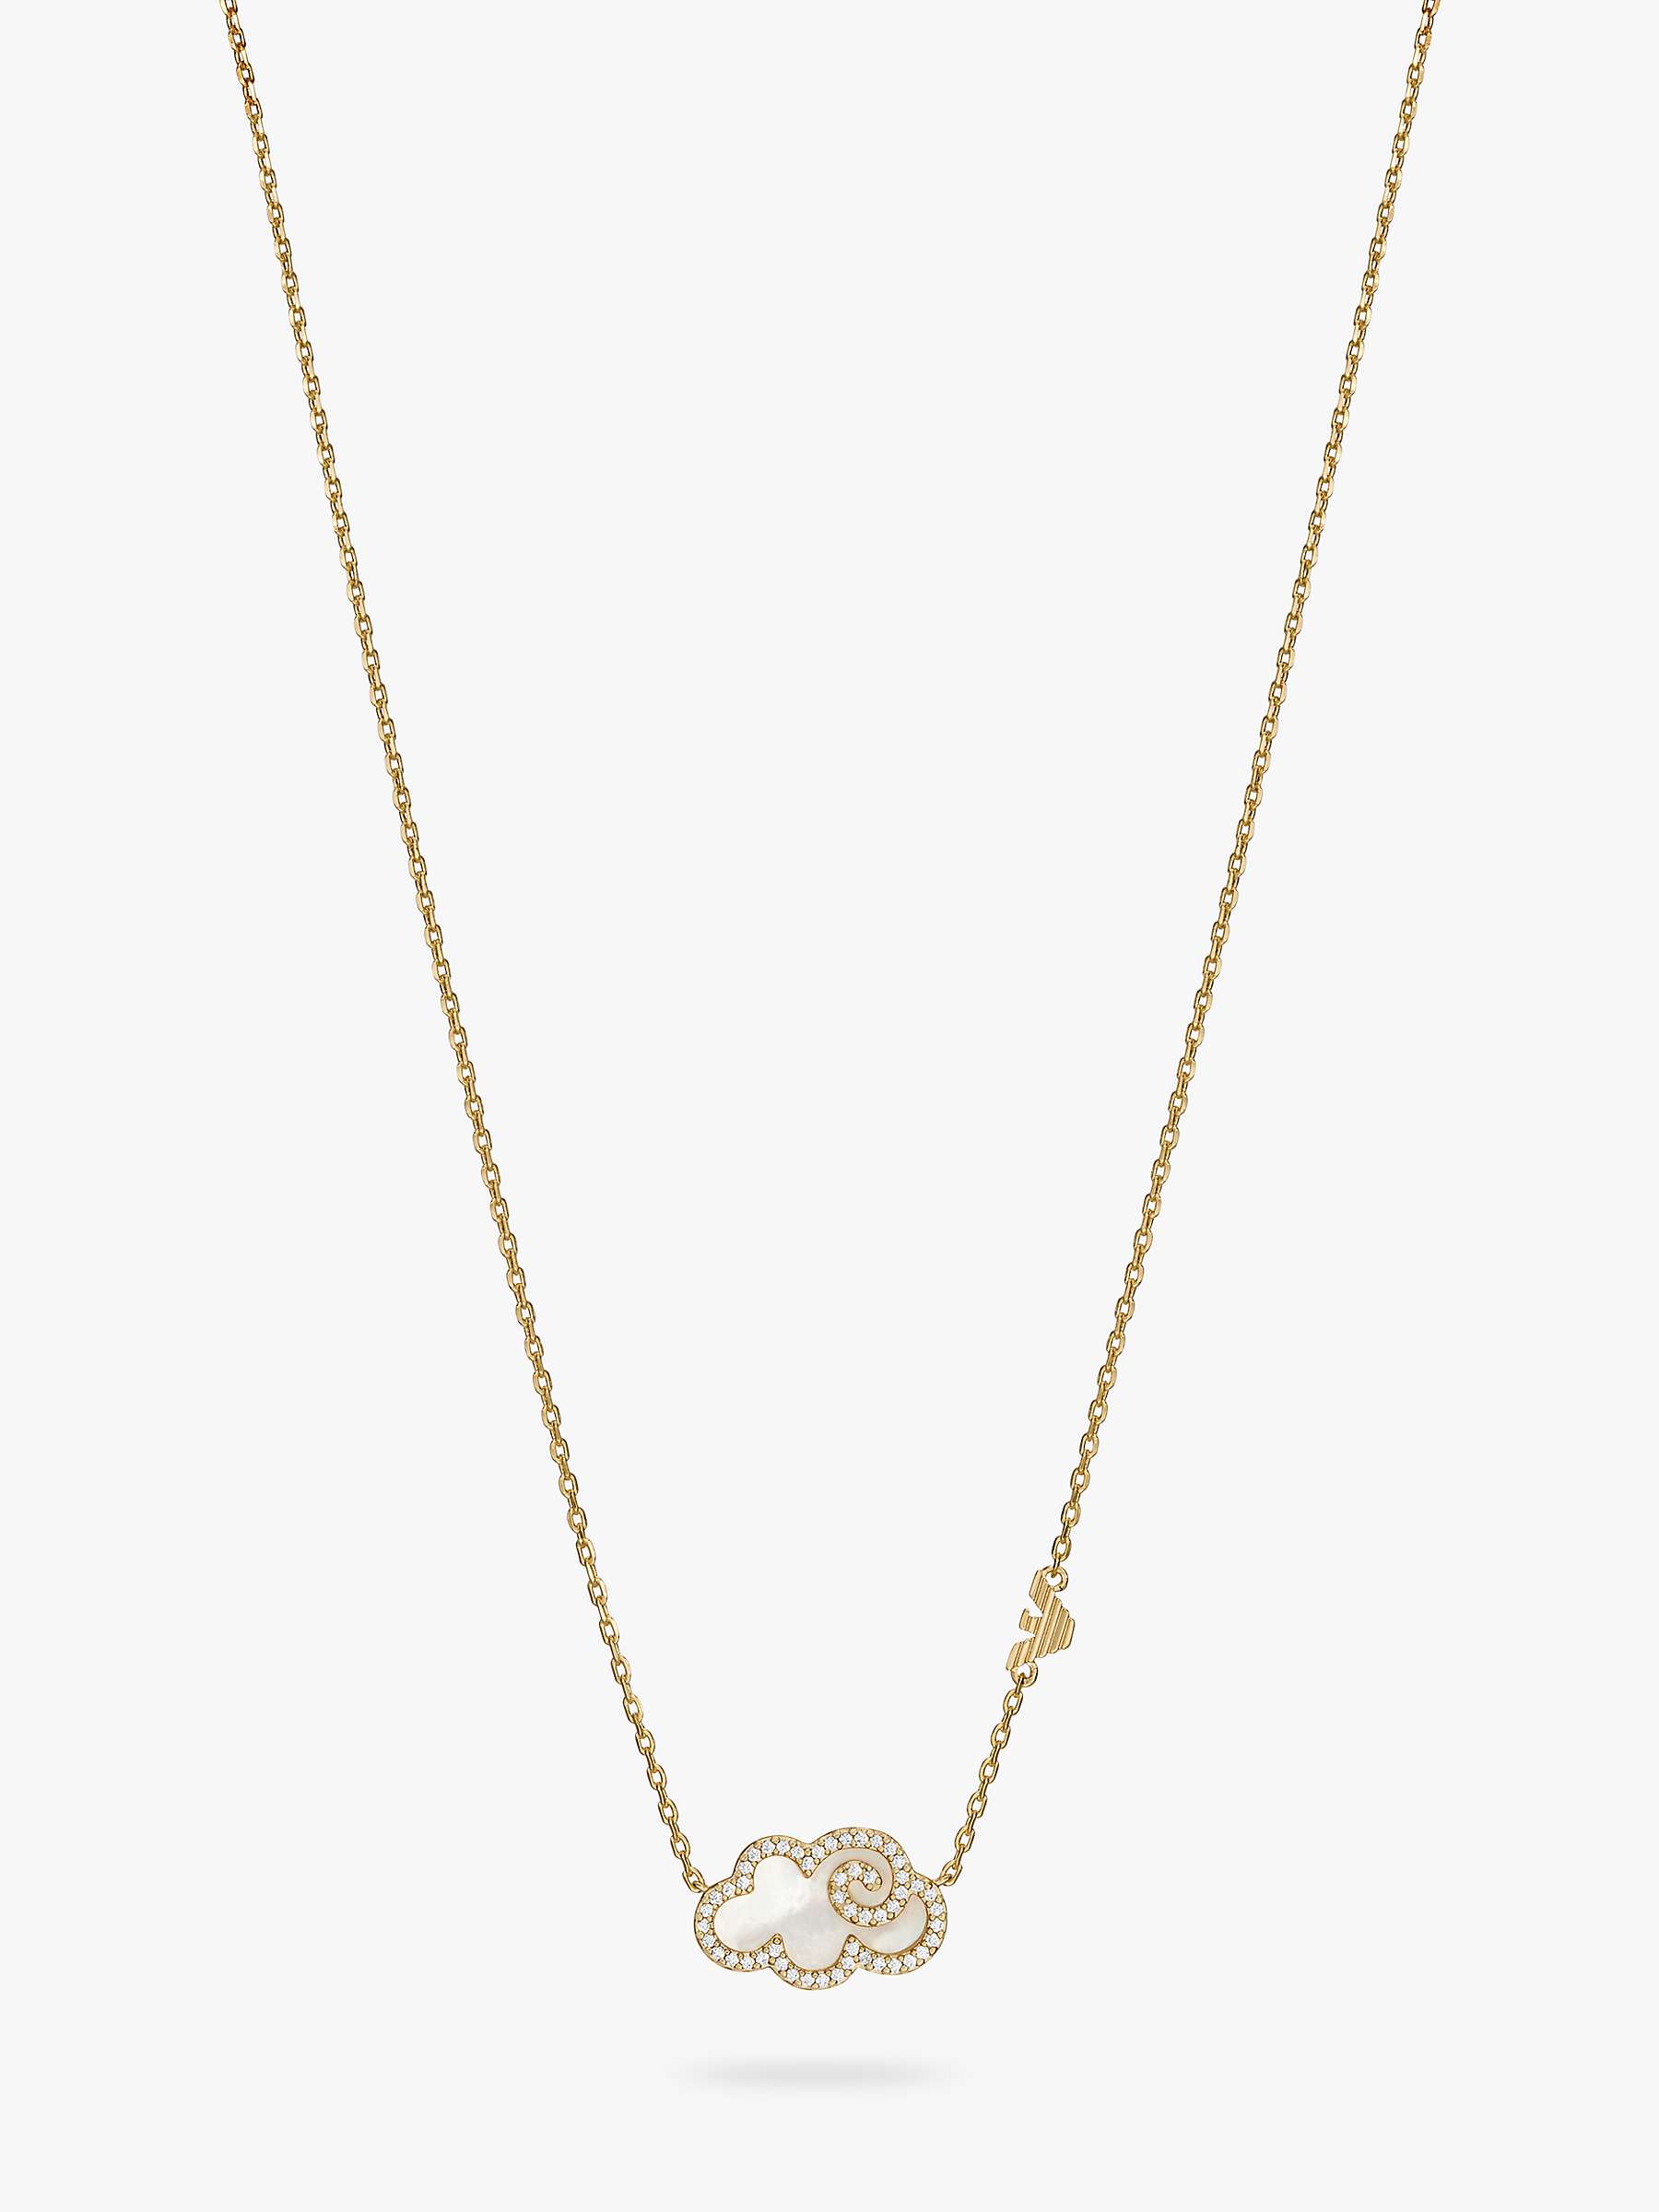 Buy Emporio Armani Cloud Mother of Pearl Pendant Necklace/Gold Online at johnlewis.com